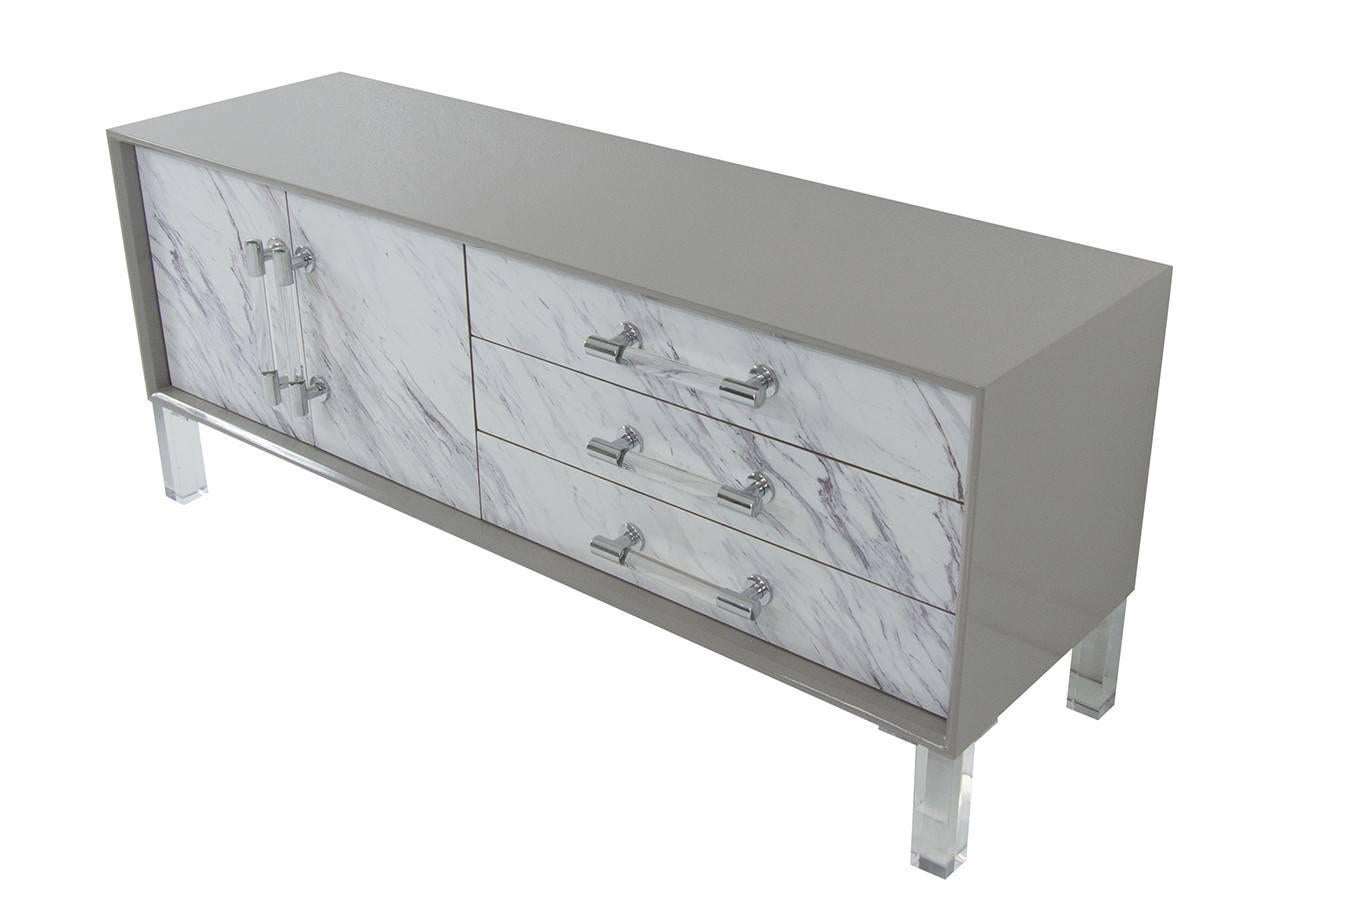 Our stylish new credenza is a class of it's own. The case is made with greystone lacquer finish and is mixed with a faux marble door and drawer fronts. This wood and stone look combination makes the piece a class of it's own. The use of the Lucite